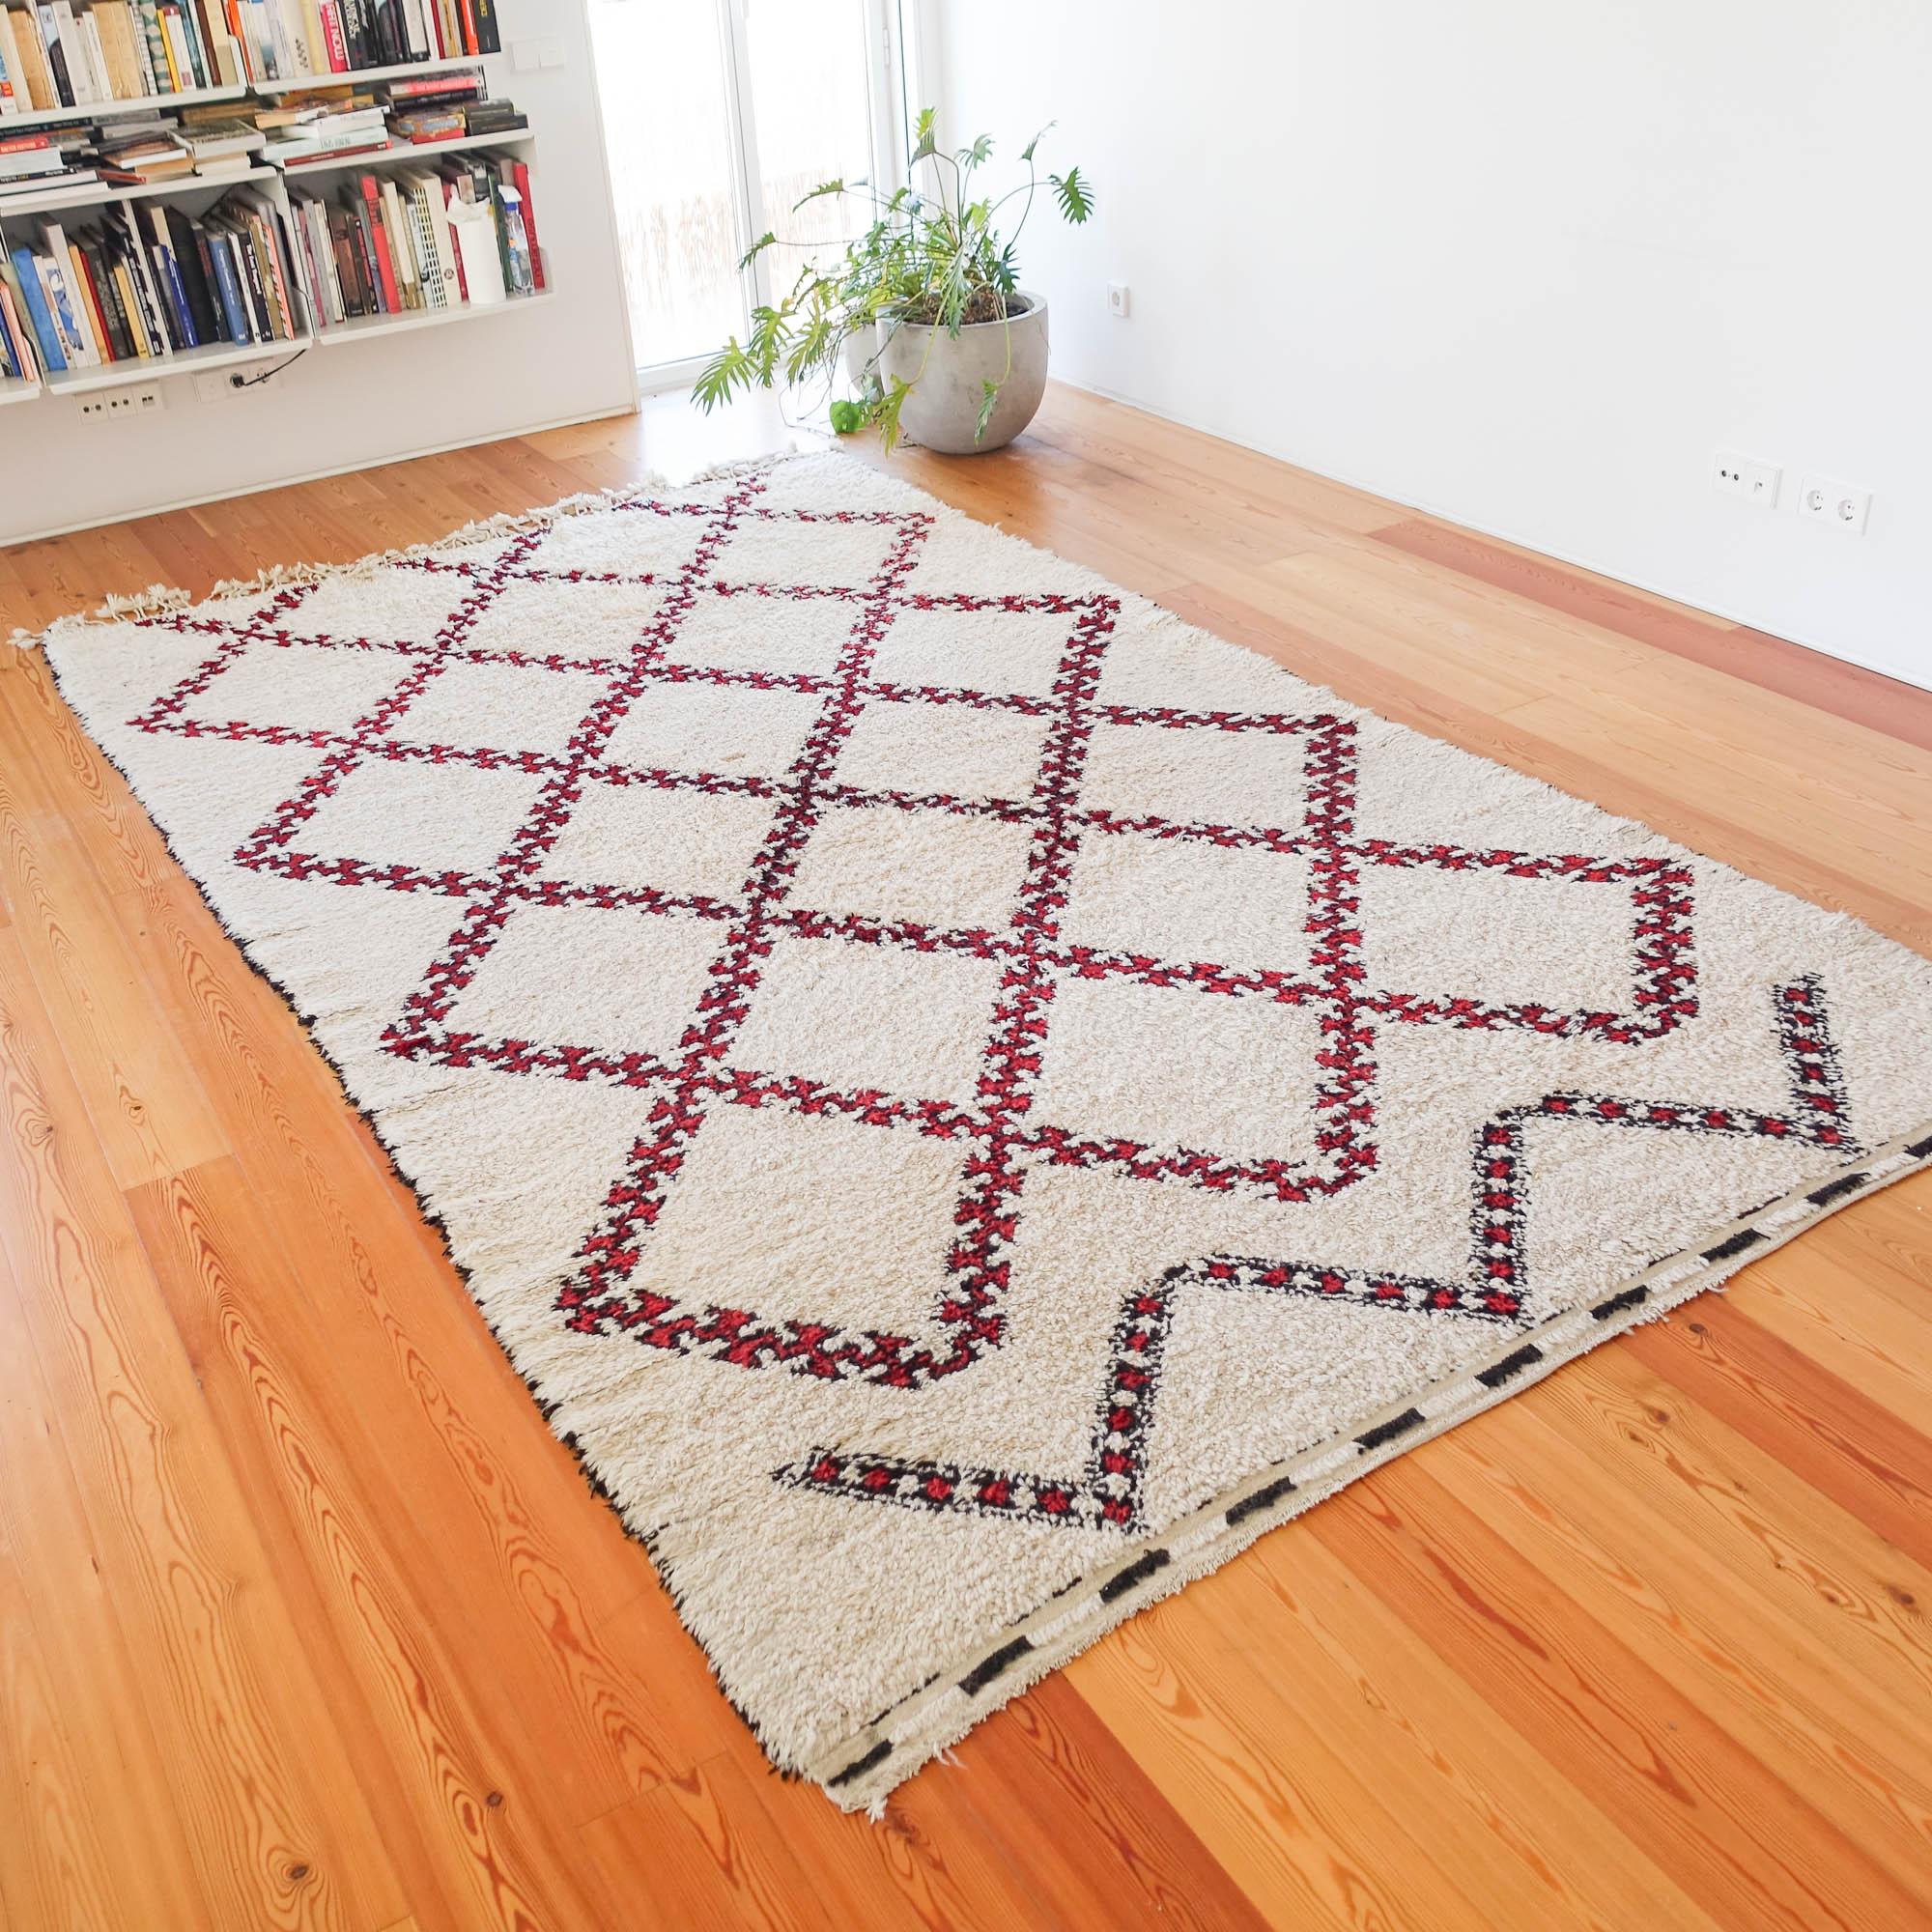 The Beni Ourain rug comes from the mountainous regions of the Middle Atlas in Morocco by the Aït Ourain tribes. It is made in a soft and thick natural wool. Today it is very popular for the sleek and minimalist style that offers and by the